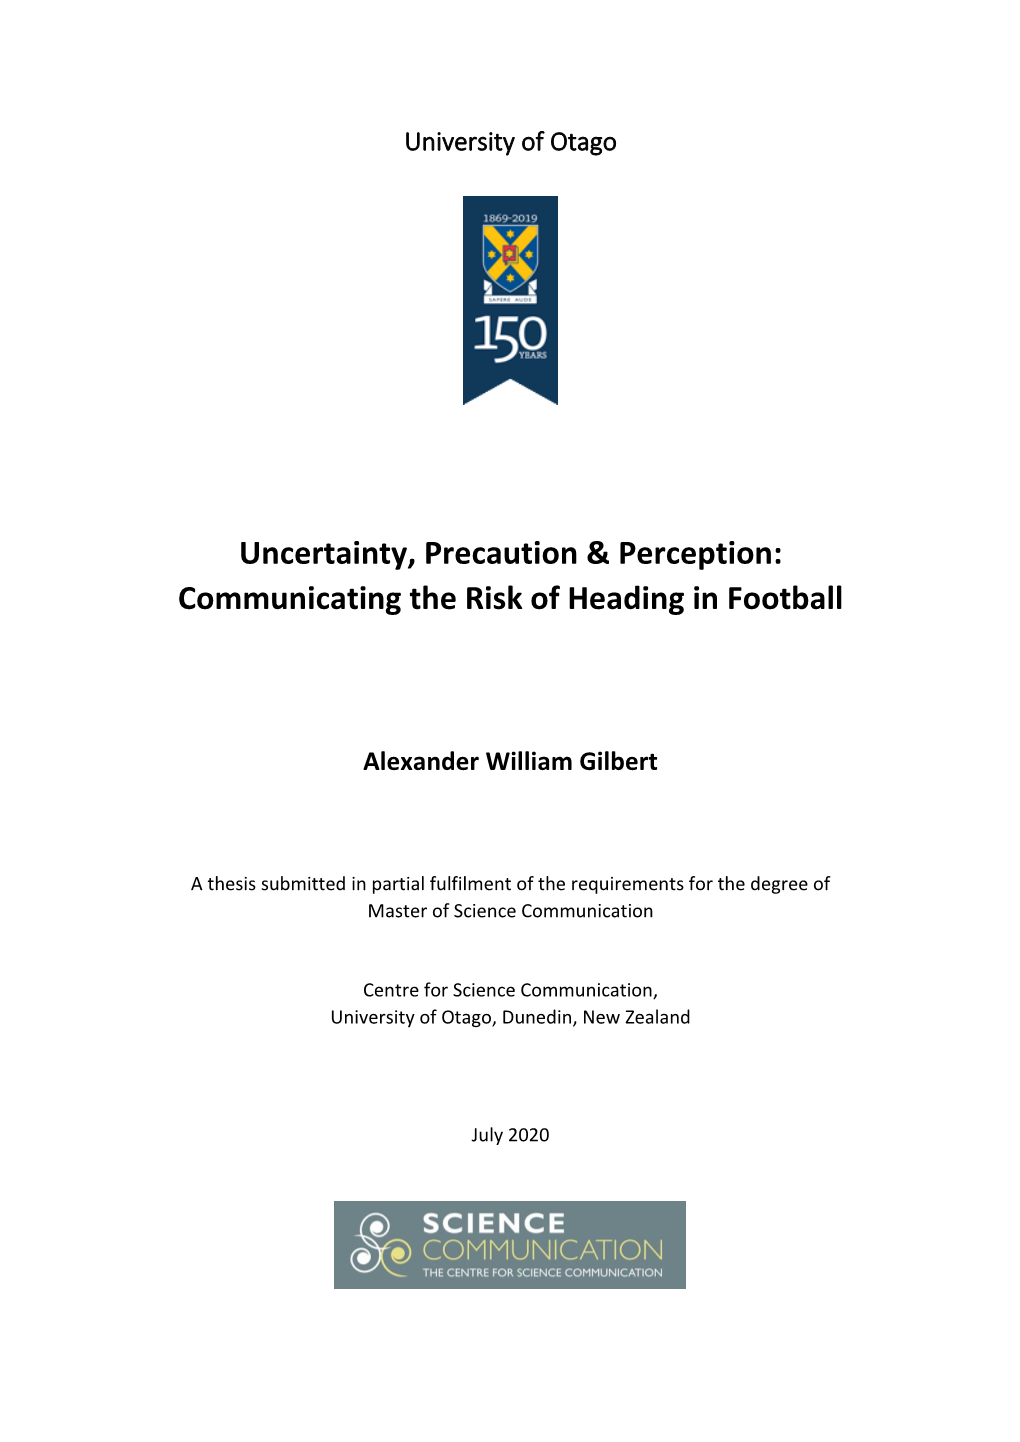 Uncertainty, Precaution & Perception: Communicating the Risk of Heading in Football